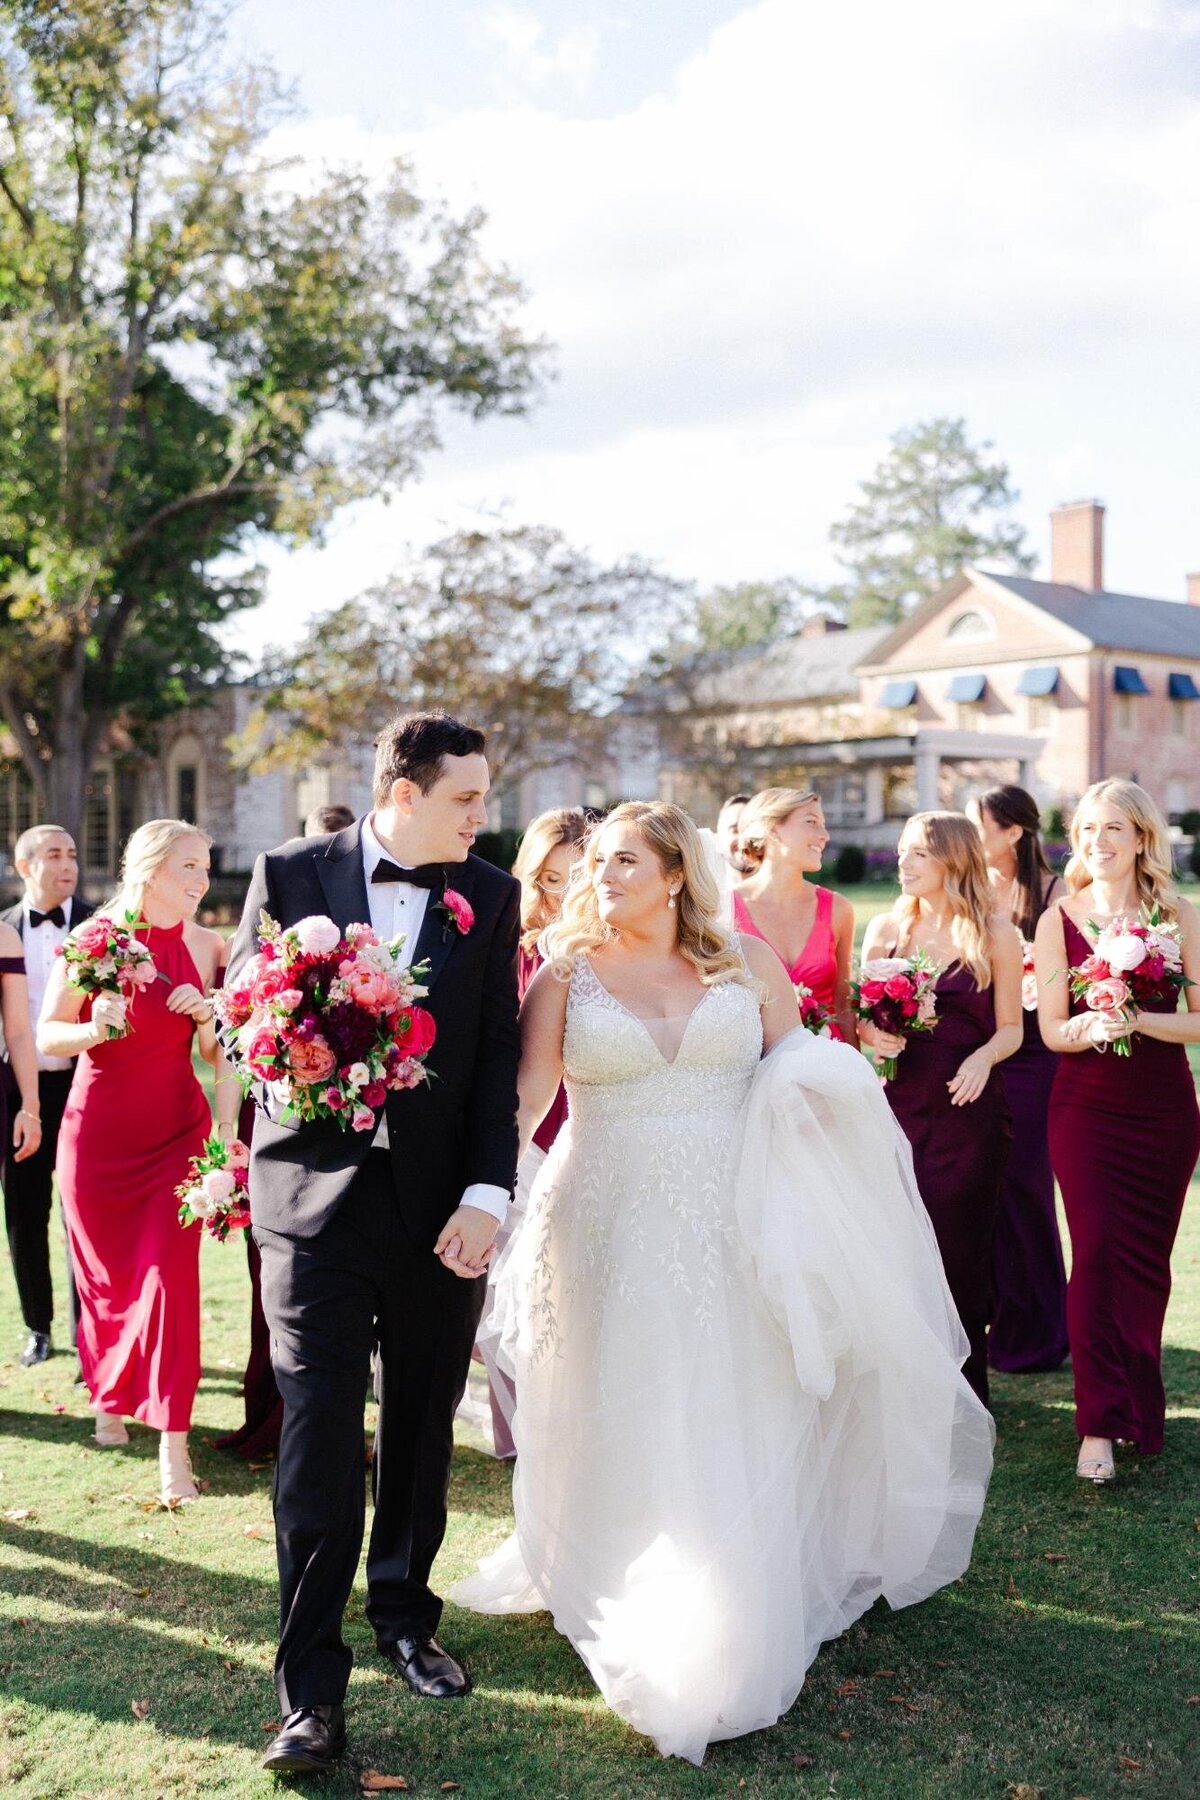 A bride and groom walking hand in hand, accompanied by bridesmaids in pink and red dresses.